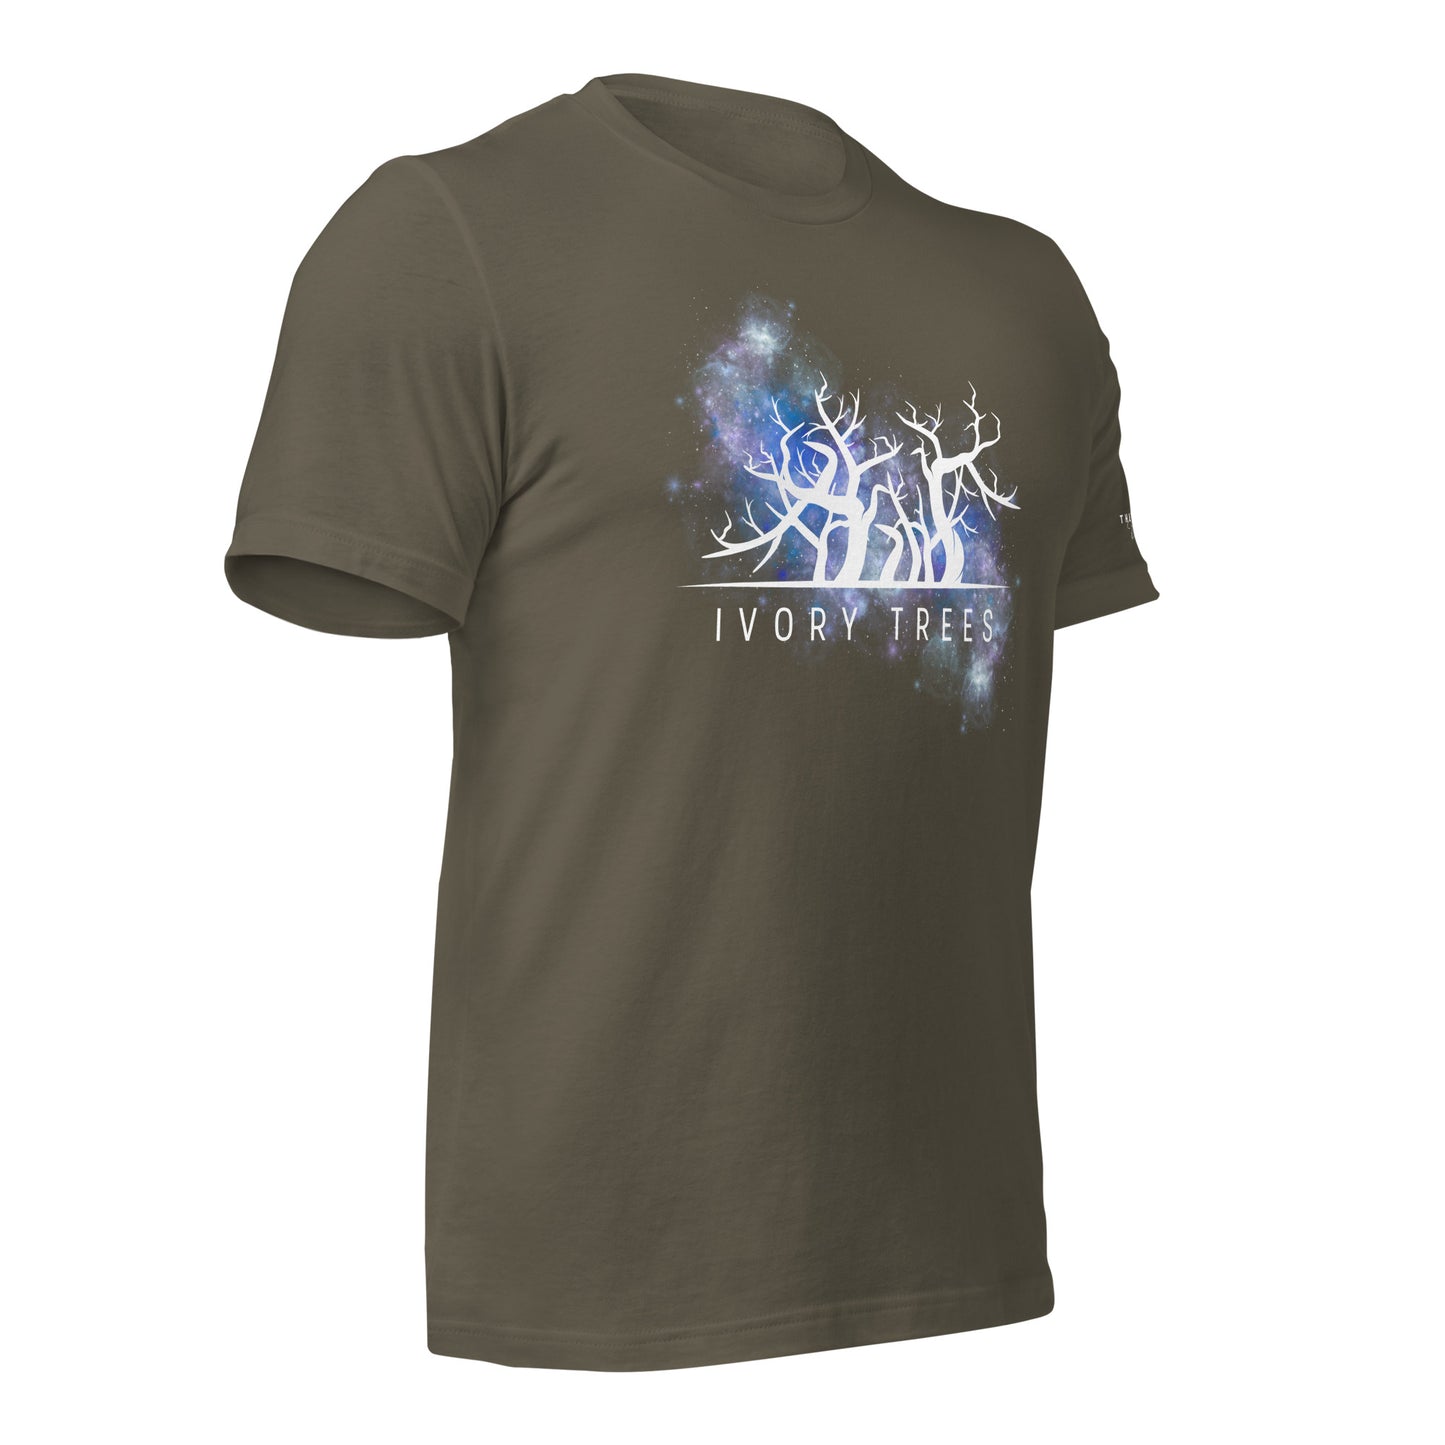 IVORY TREES NEBULA T-Shirt - The Diving Universe by Kristine Kathryn Rusch